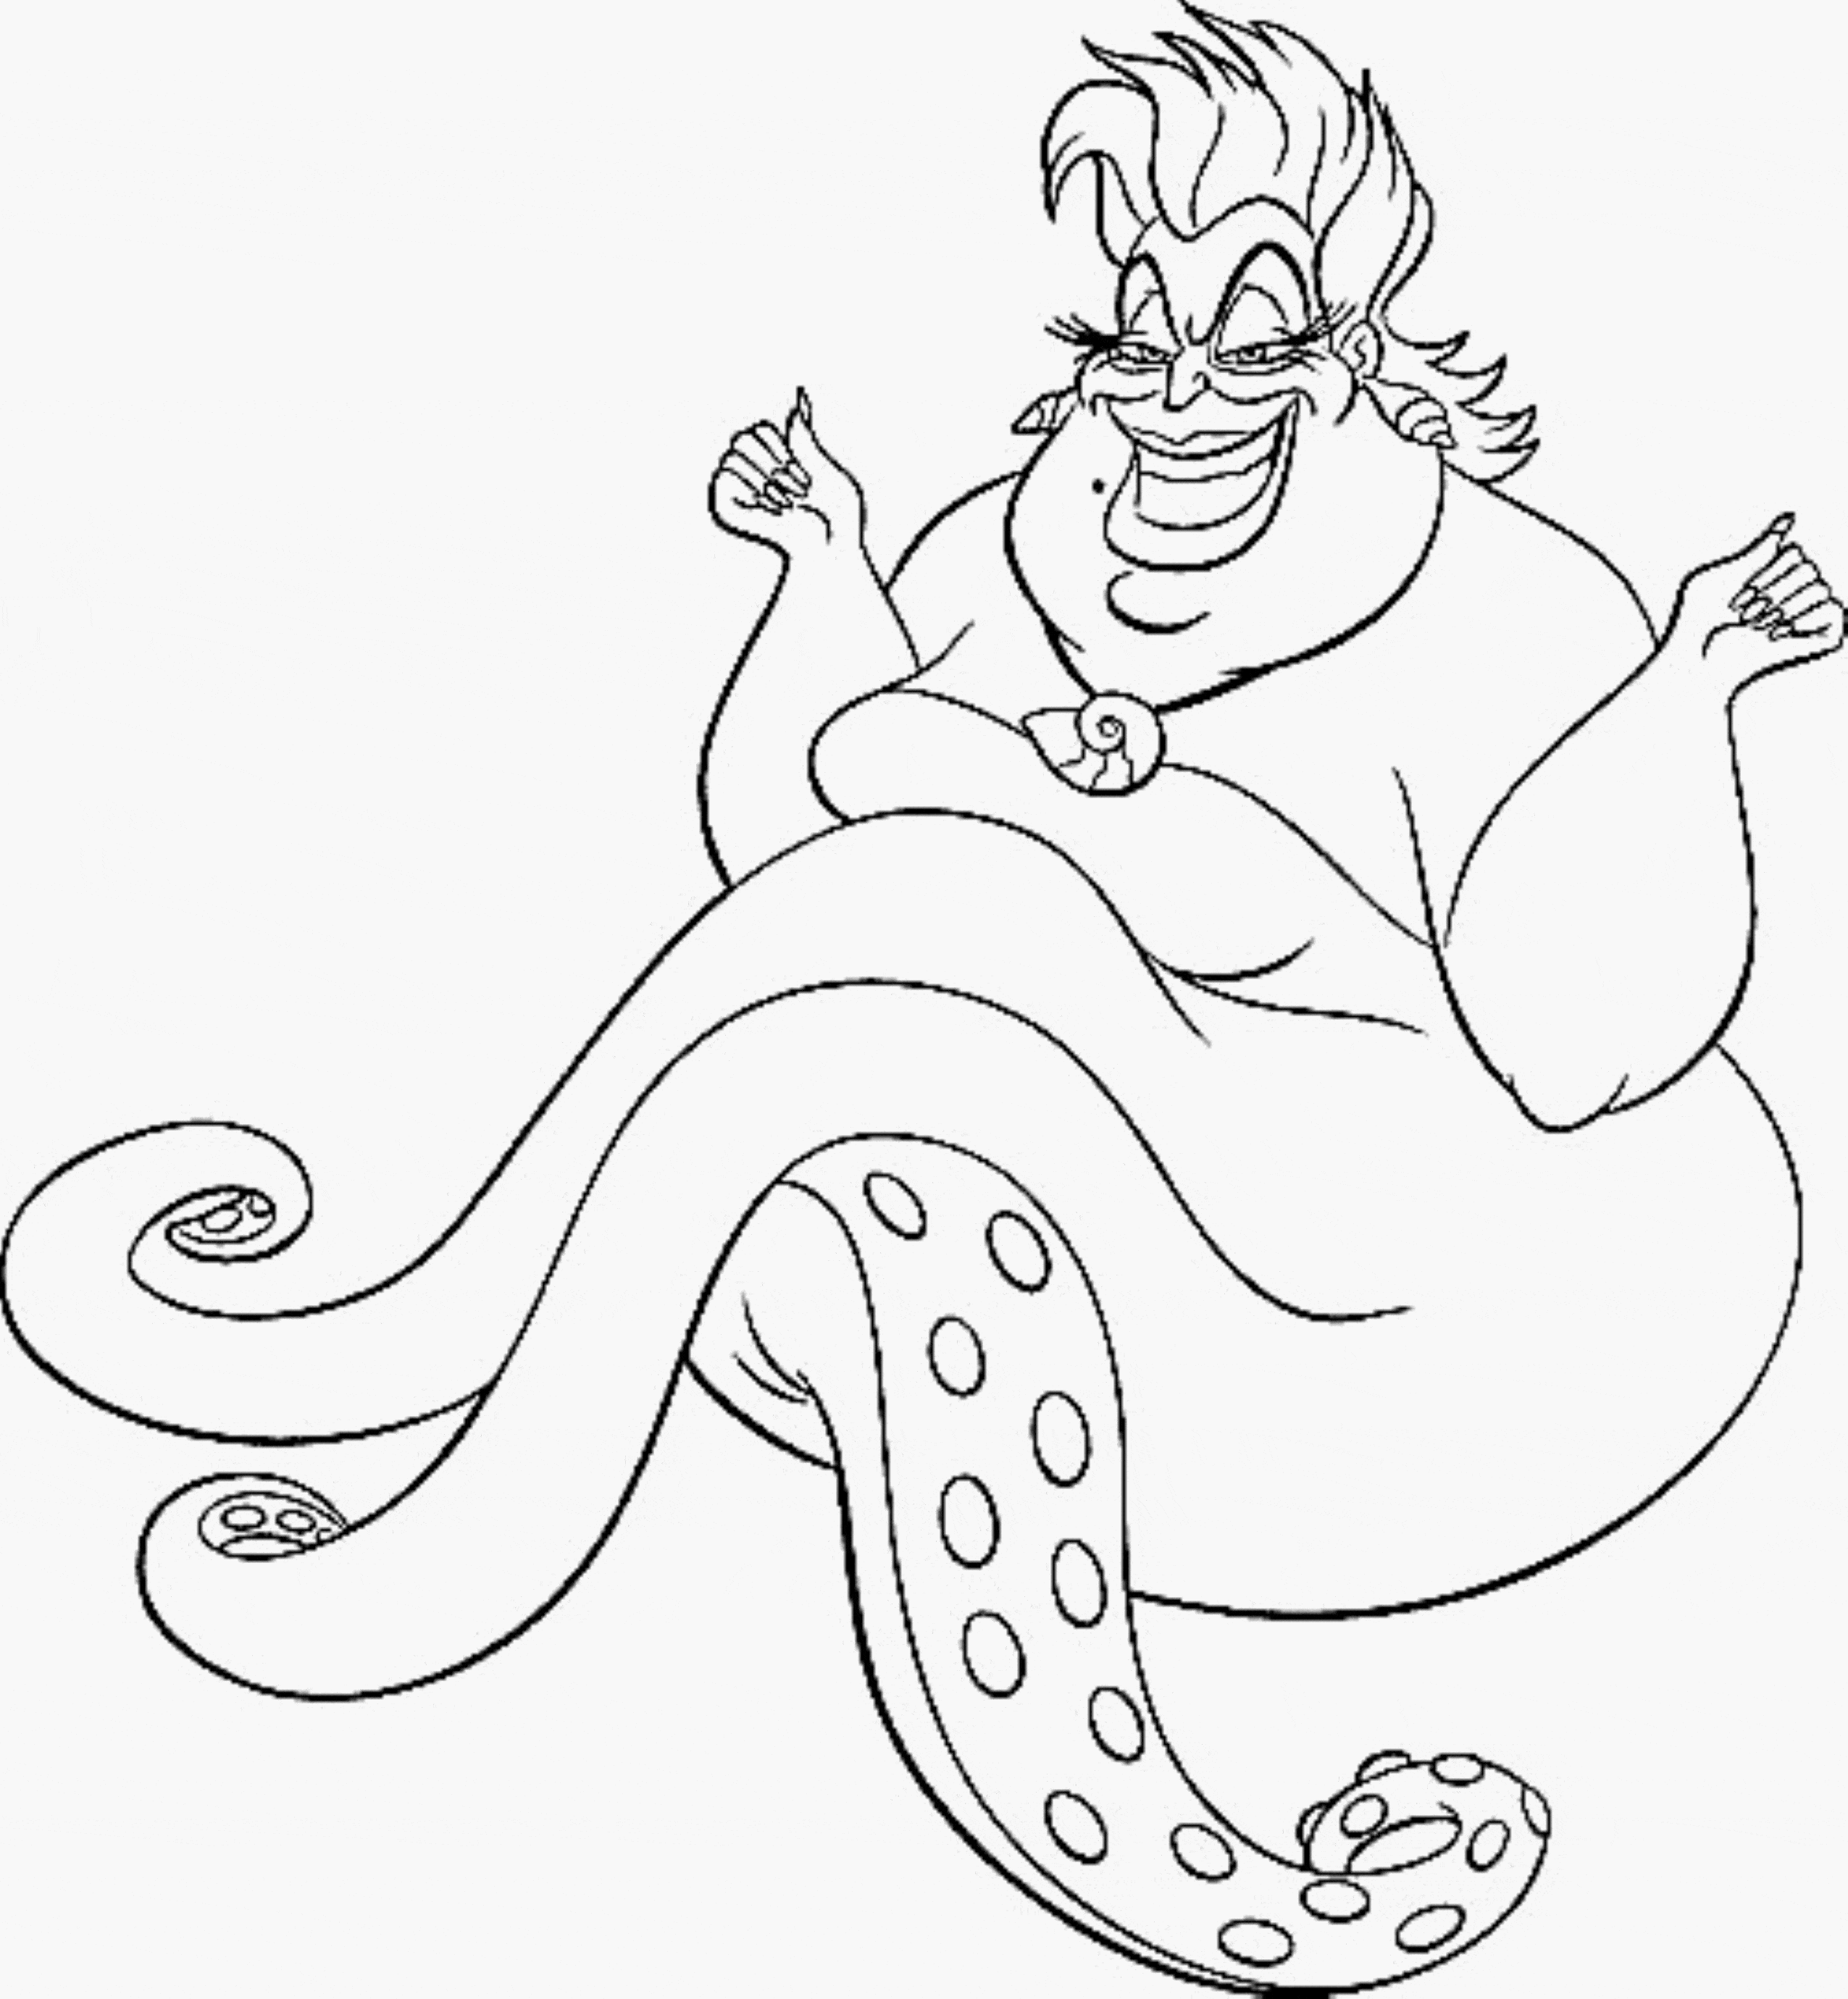 Free Printable Mermaid Coloring Sheets Coloring Pages